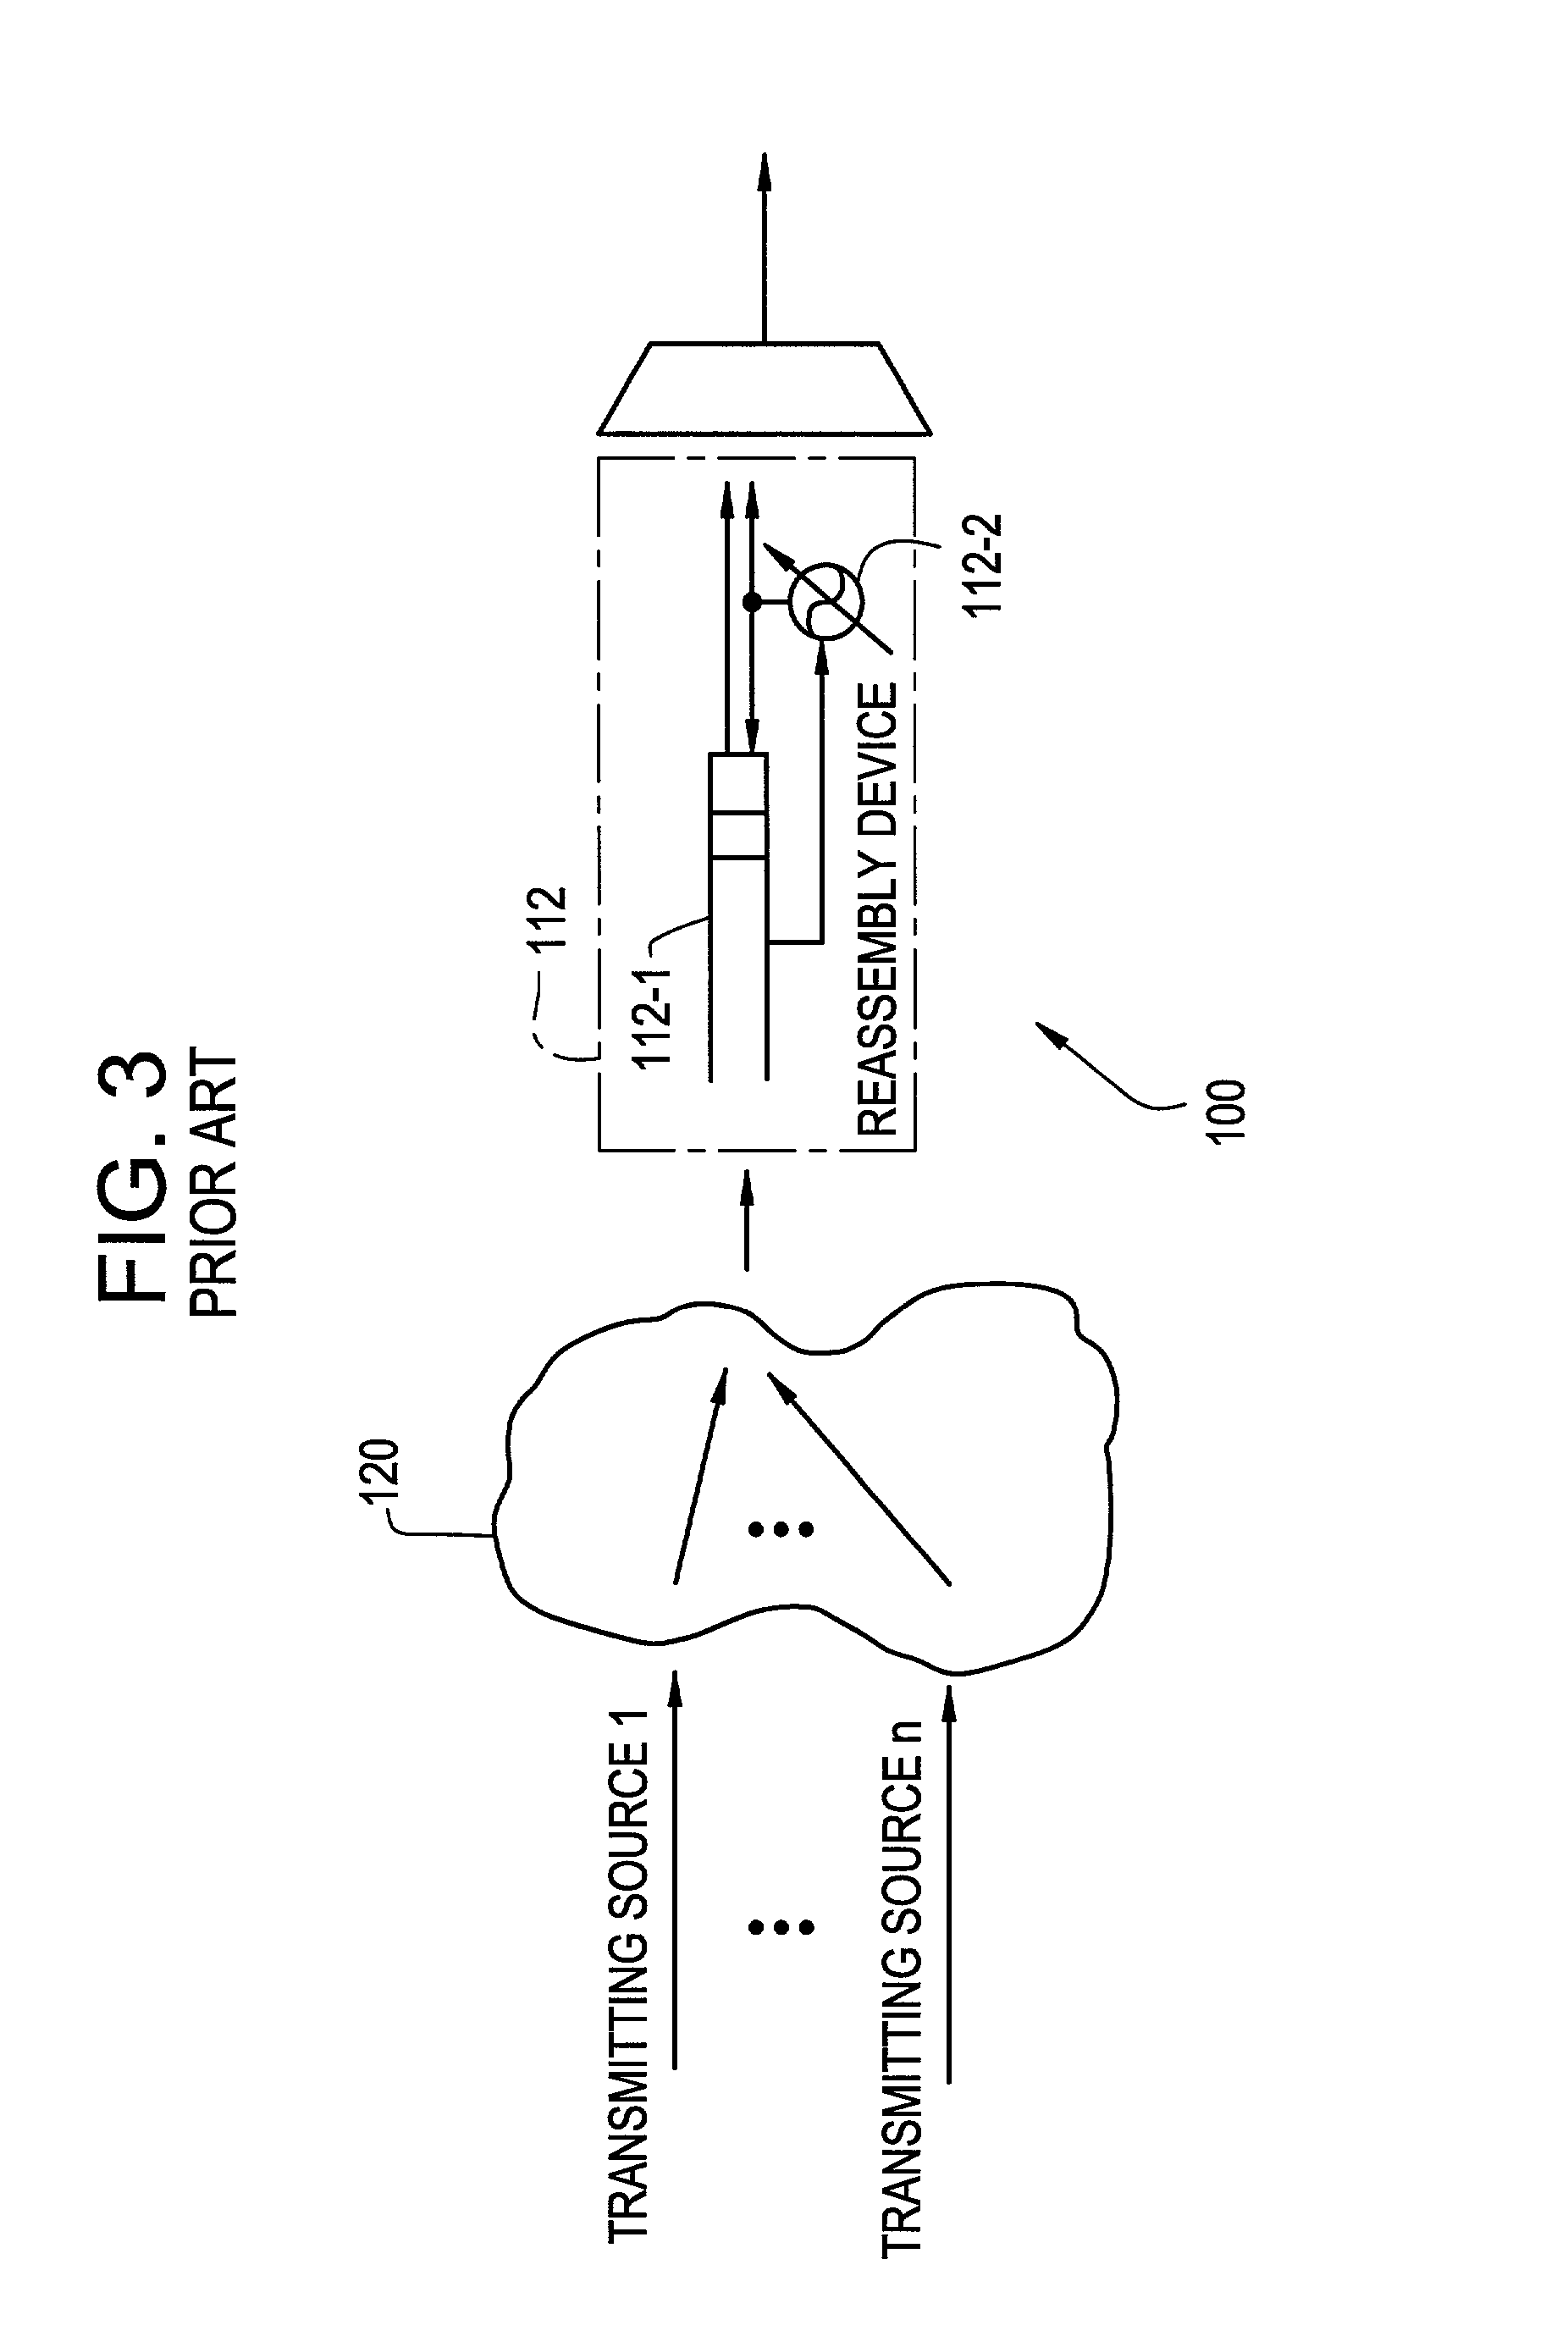 Device for reassembling cell data device for circuit emulation service and method of ATM synchronization control